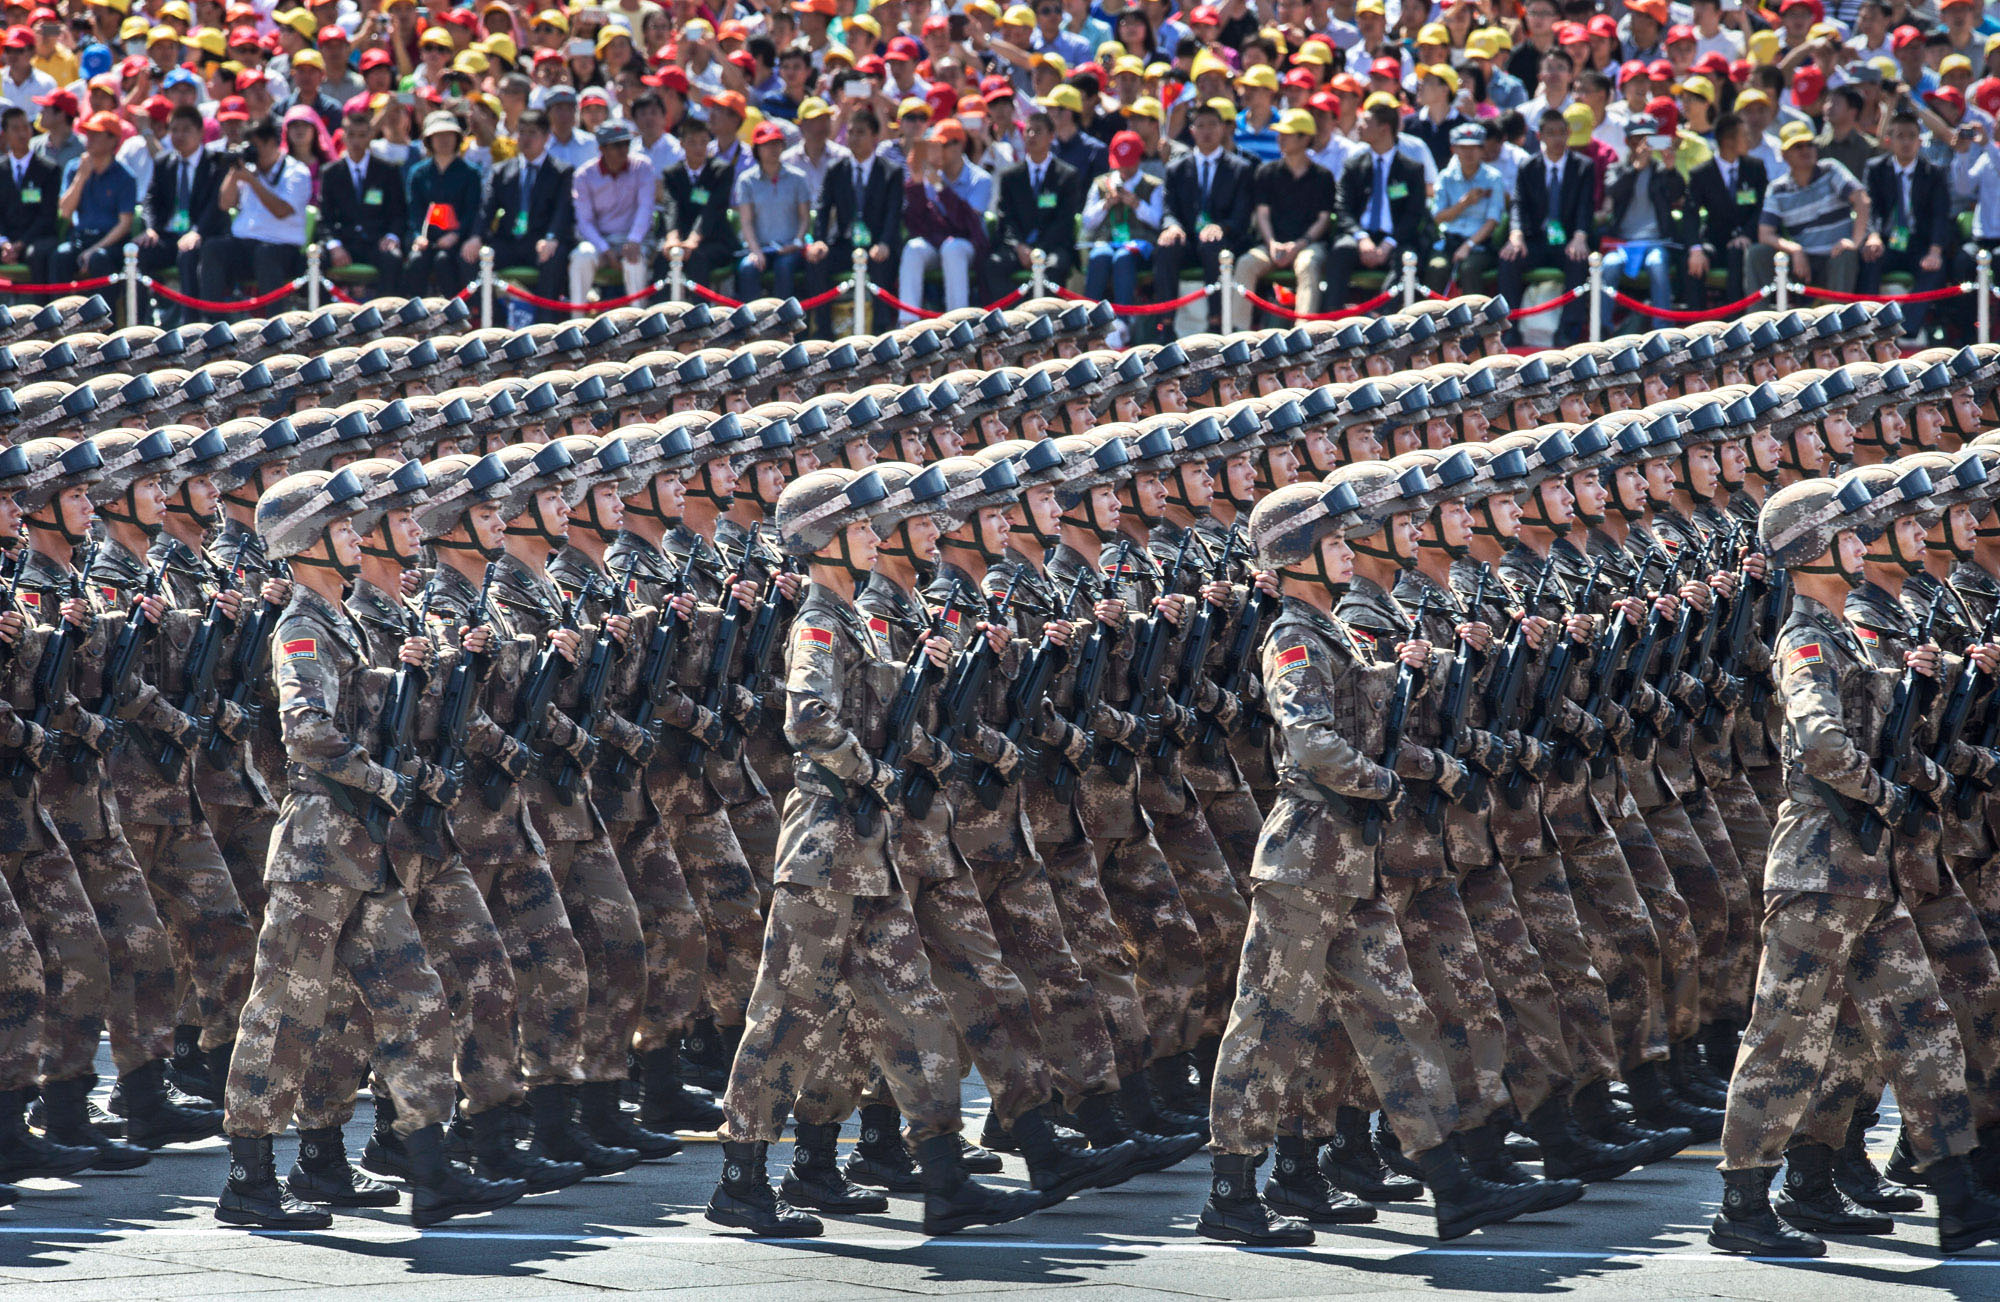 A group of soldiers marching in formation

Description automatically generated